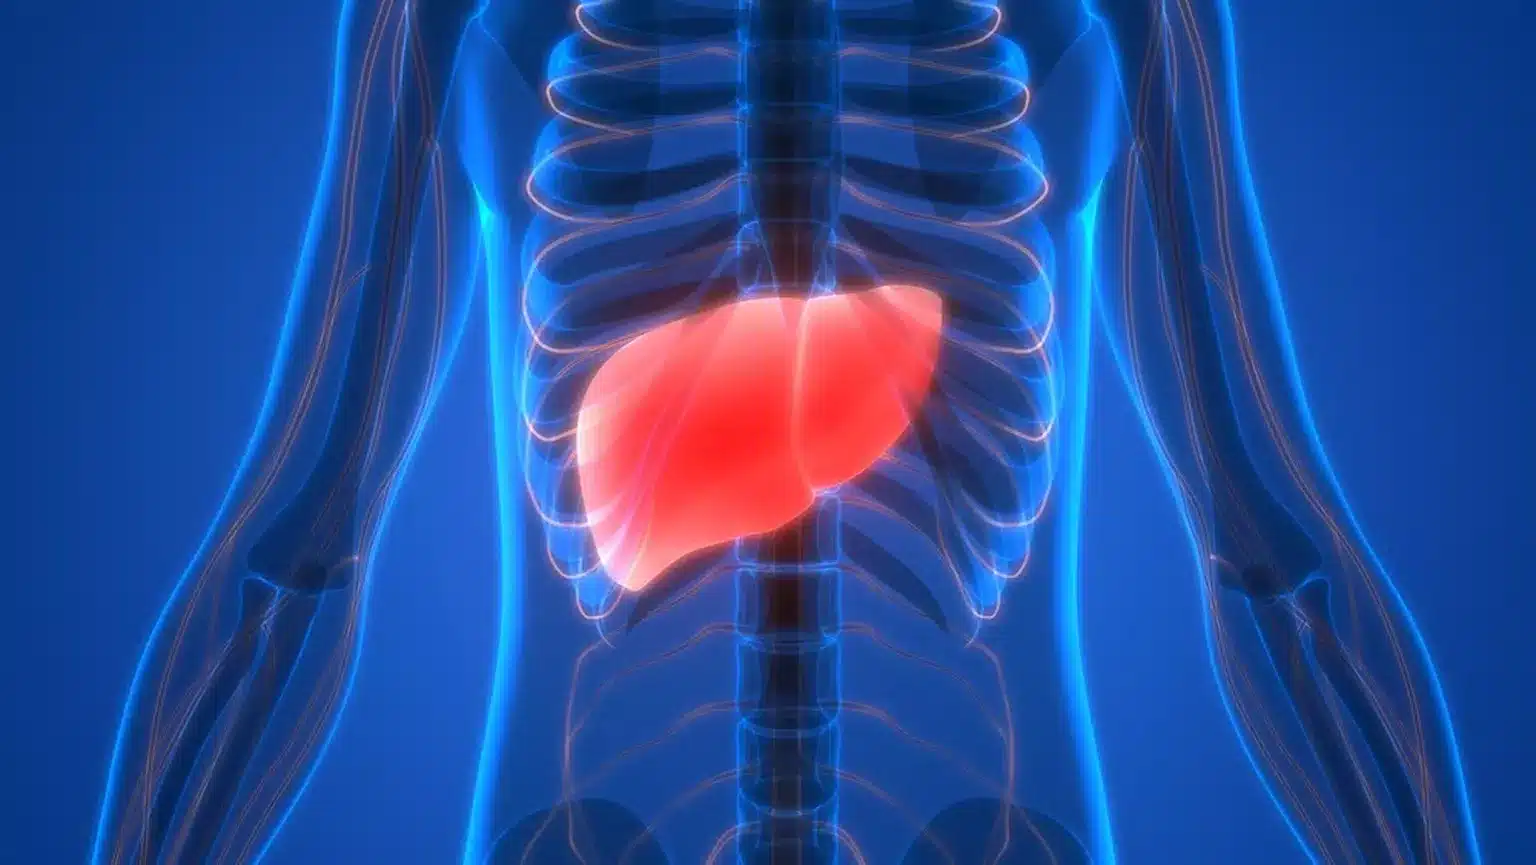 How Weight Loss Can Affect Non-Alcoholic Fatty Liver Disease